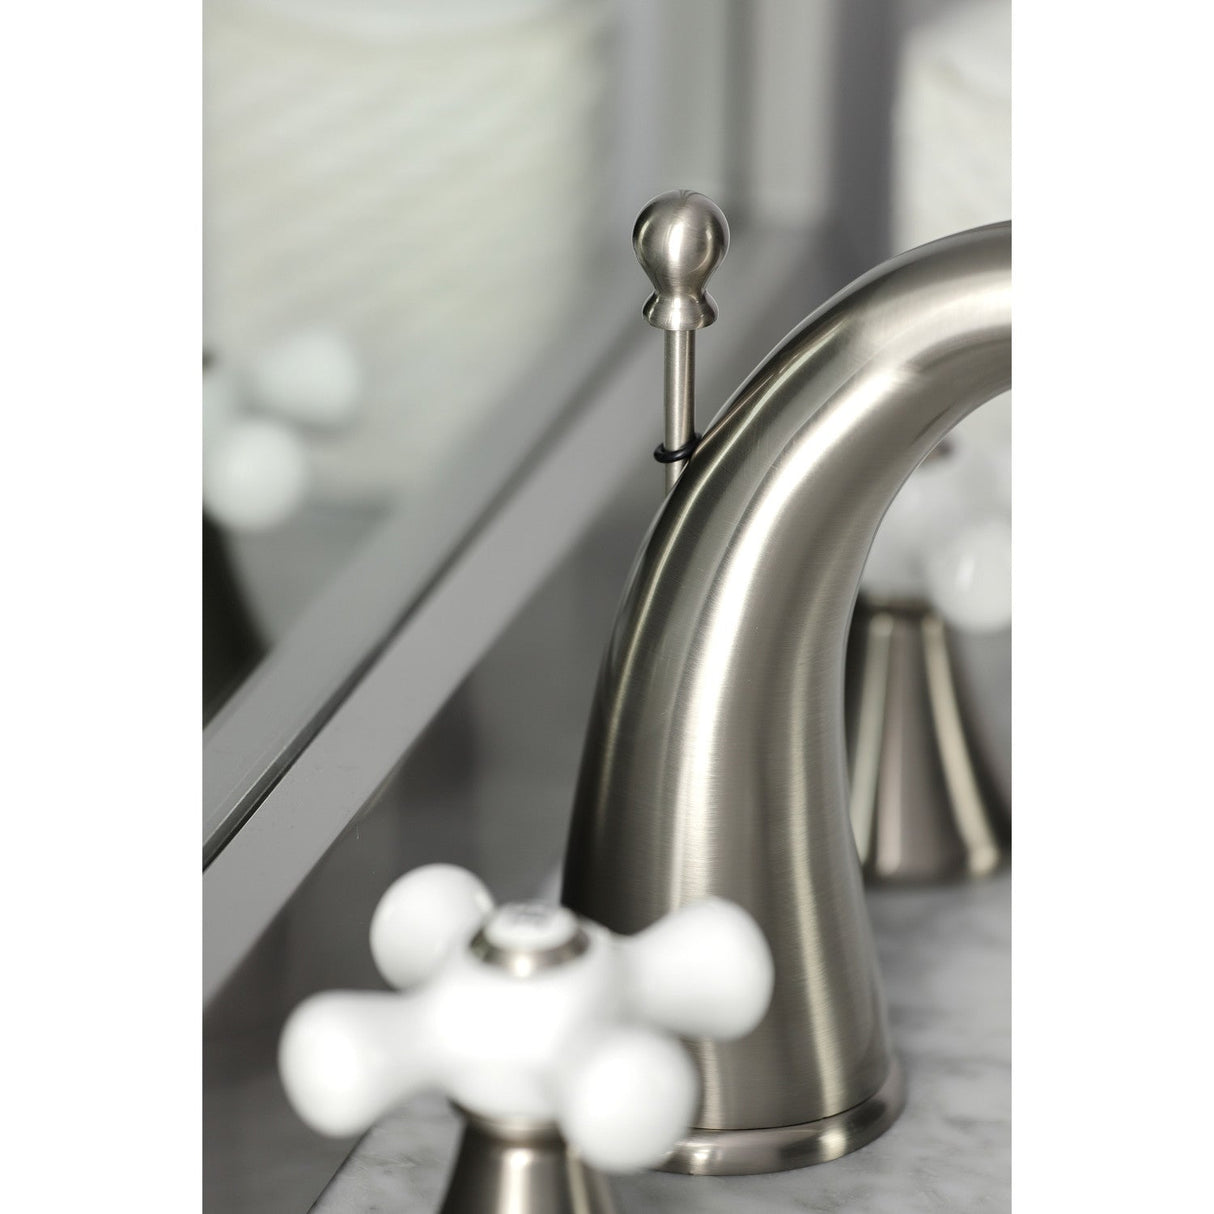 Naples KS2978PX Two-Handle 3-Hole Deck Mount Widespread Bathroom Faucet with Brass Pop-Up, Brushed Nickel